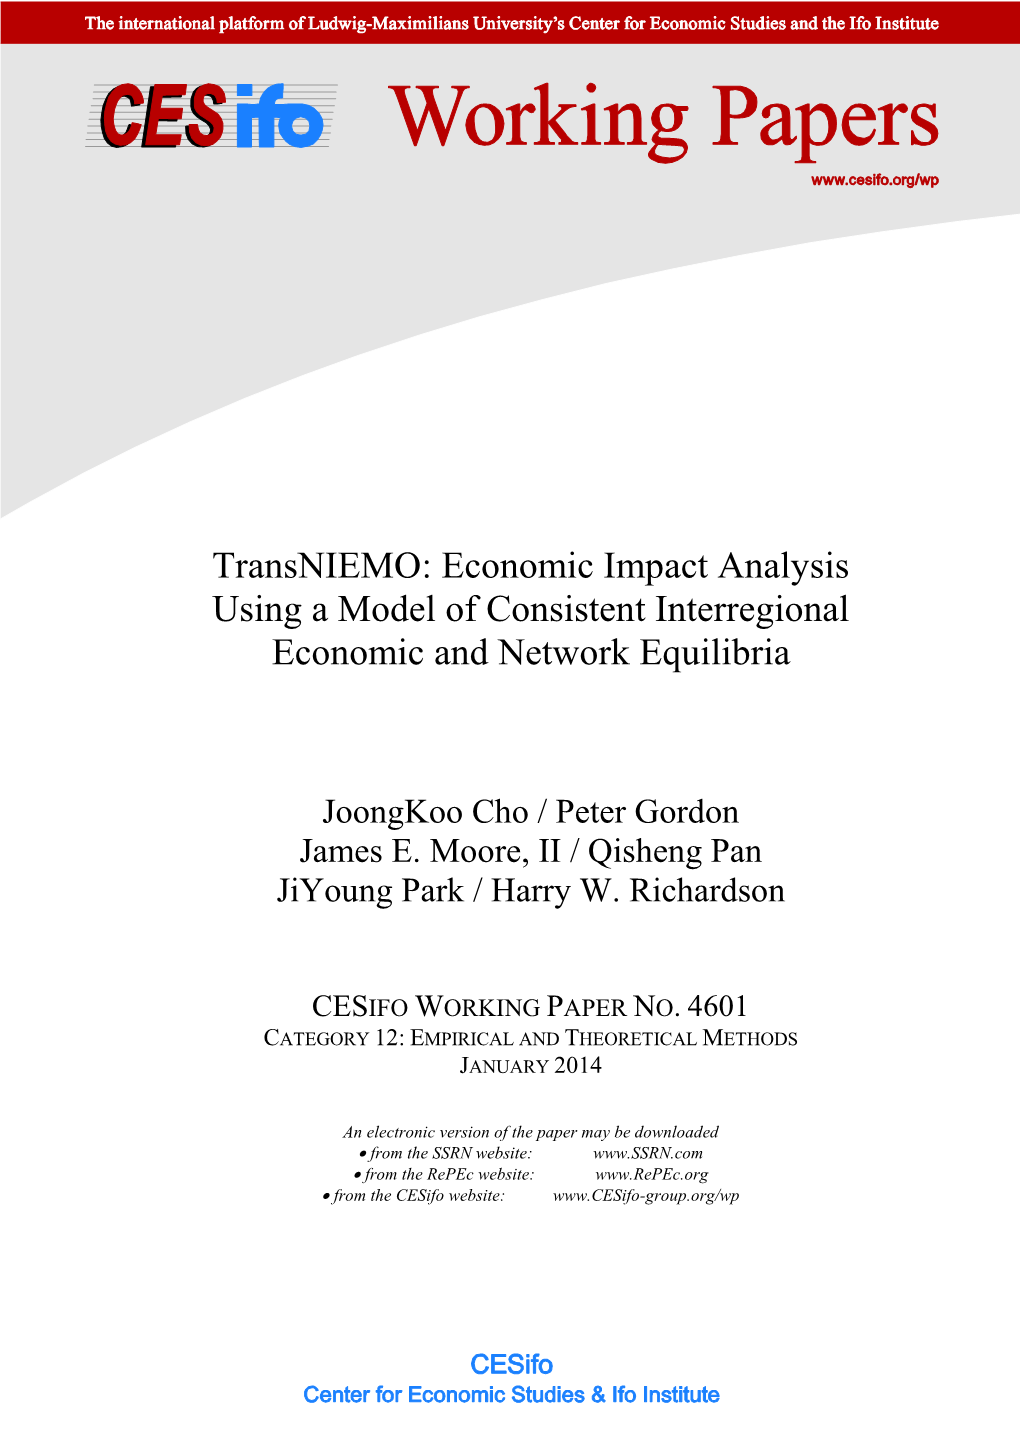 Transniemo: Economic Impact Analysis Using a Model of Consistent Interregional Economic and Network Equilibria